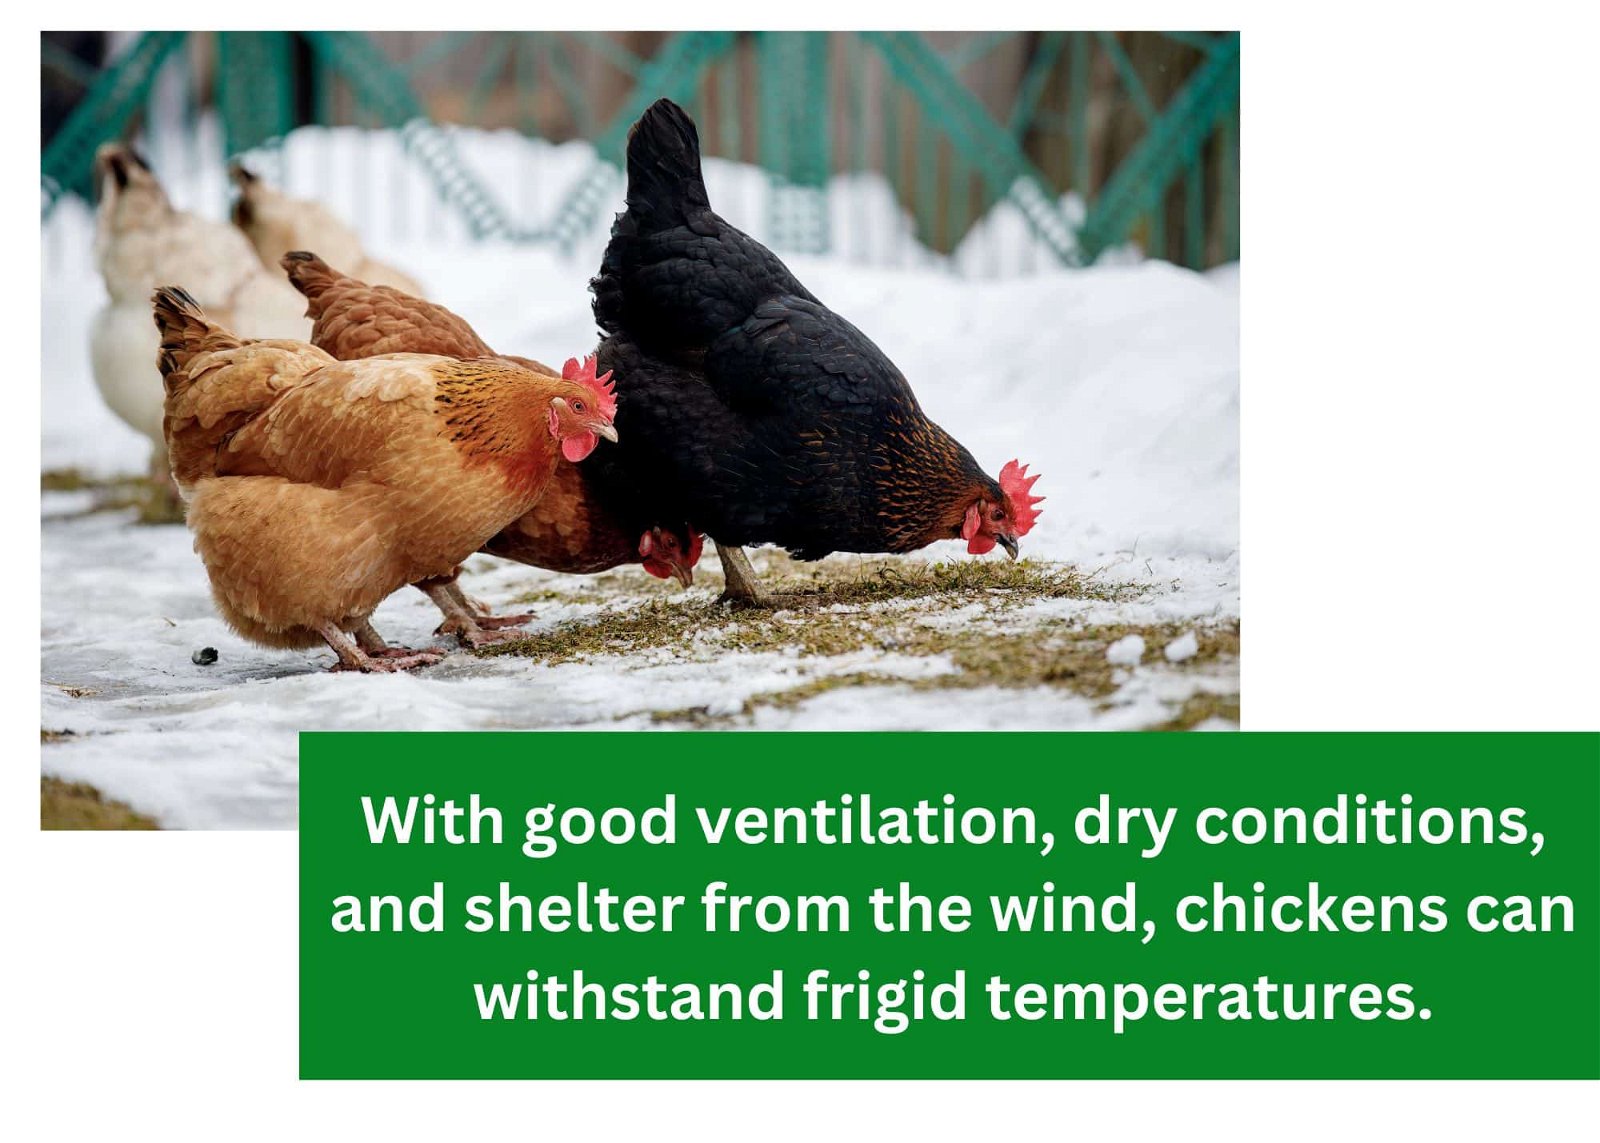 with good ventilation, dry conditions, and shelter from the wind